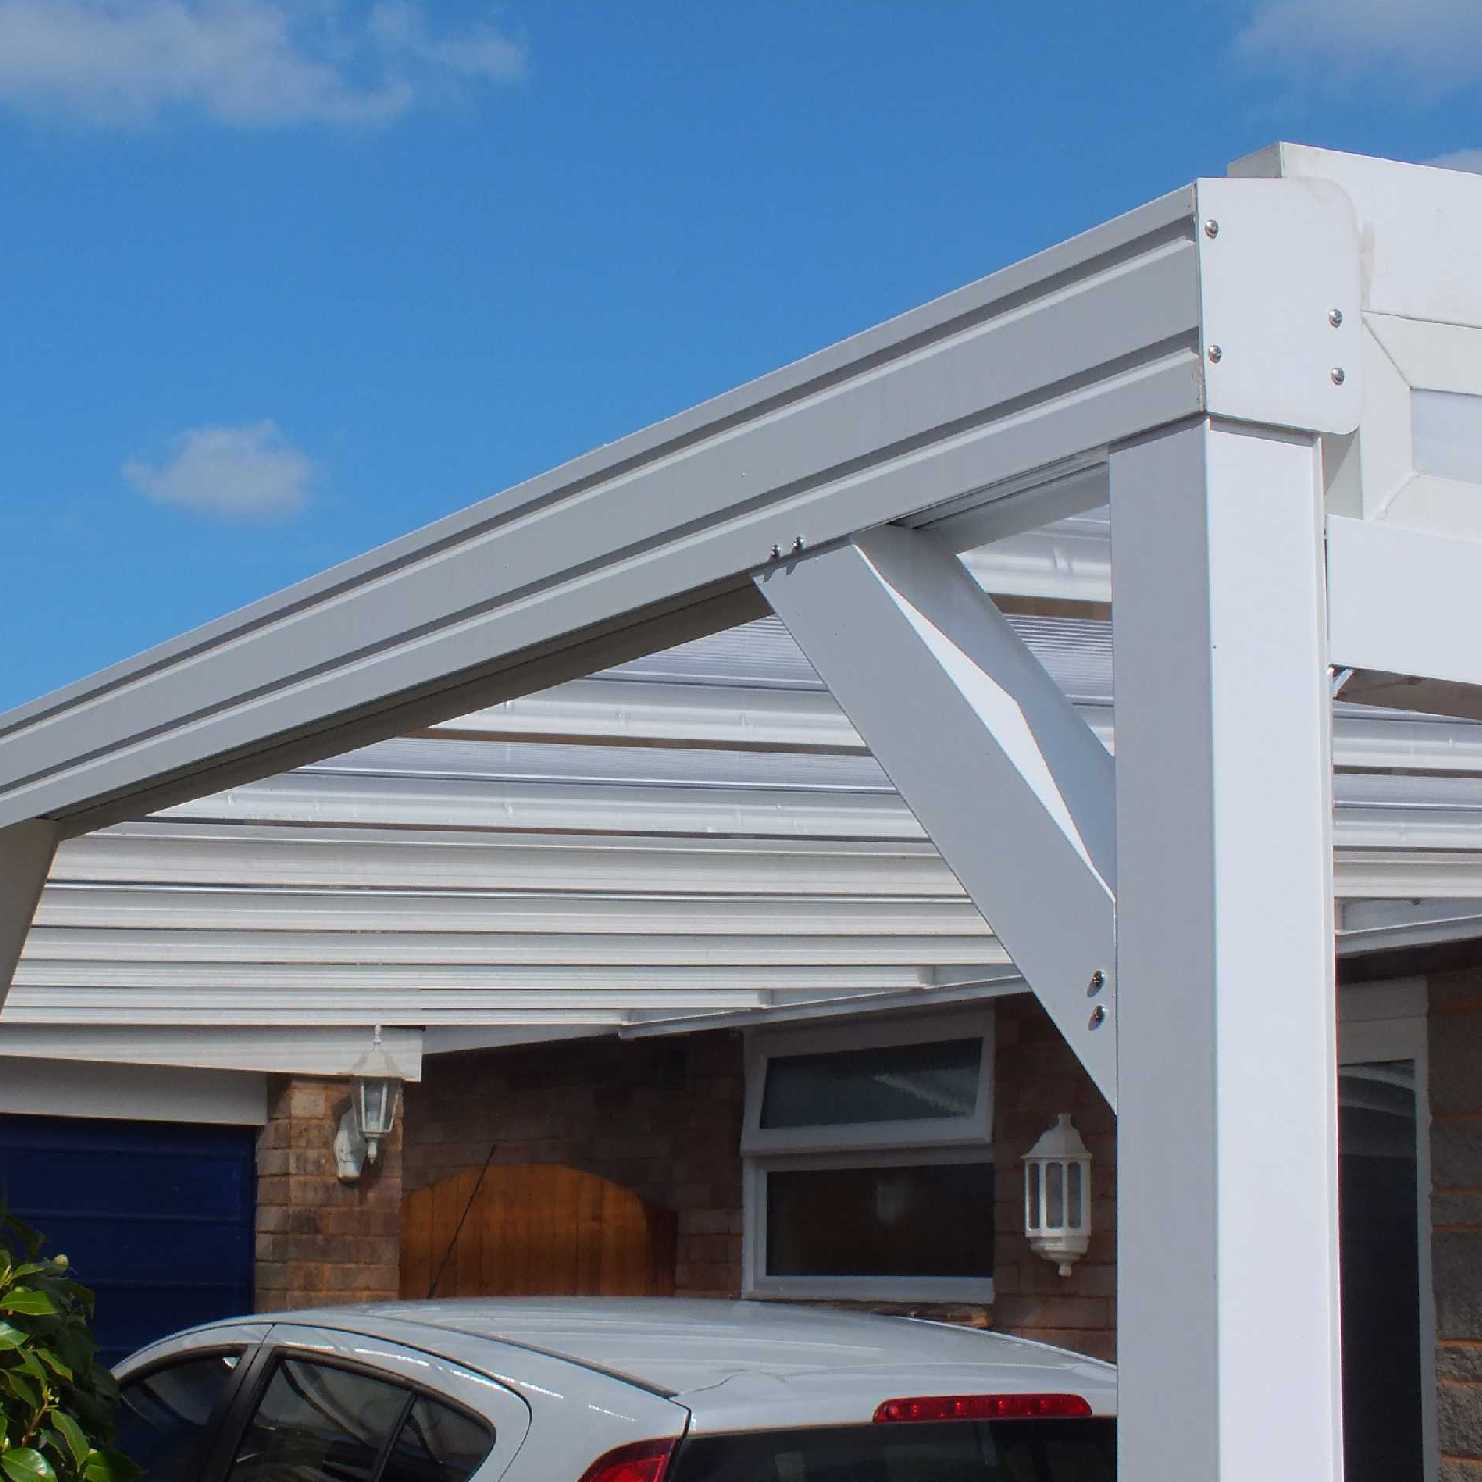 Great deals on Omega Smart Lean-To Canopy, White with 16mm Polycarbonate Glazing - 8.0m (W) x 4.5m (P), (4) Supporting Posts